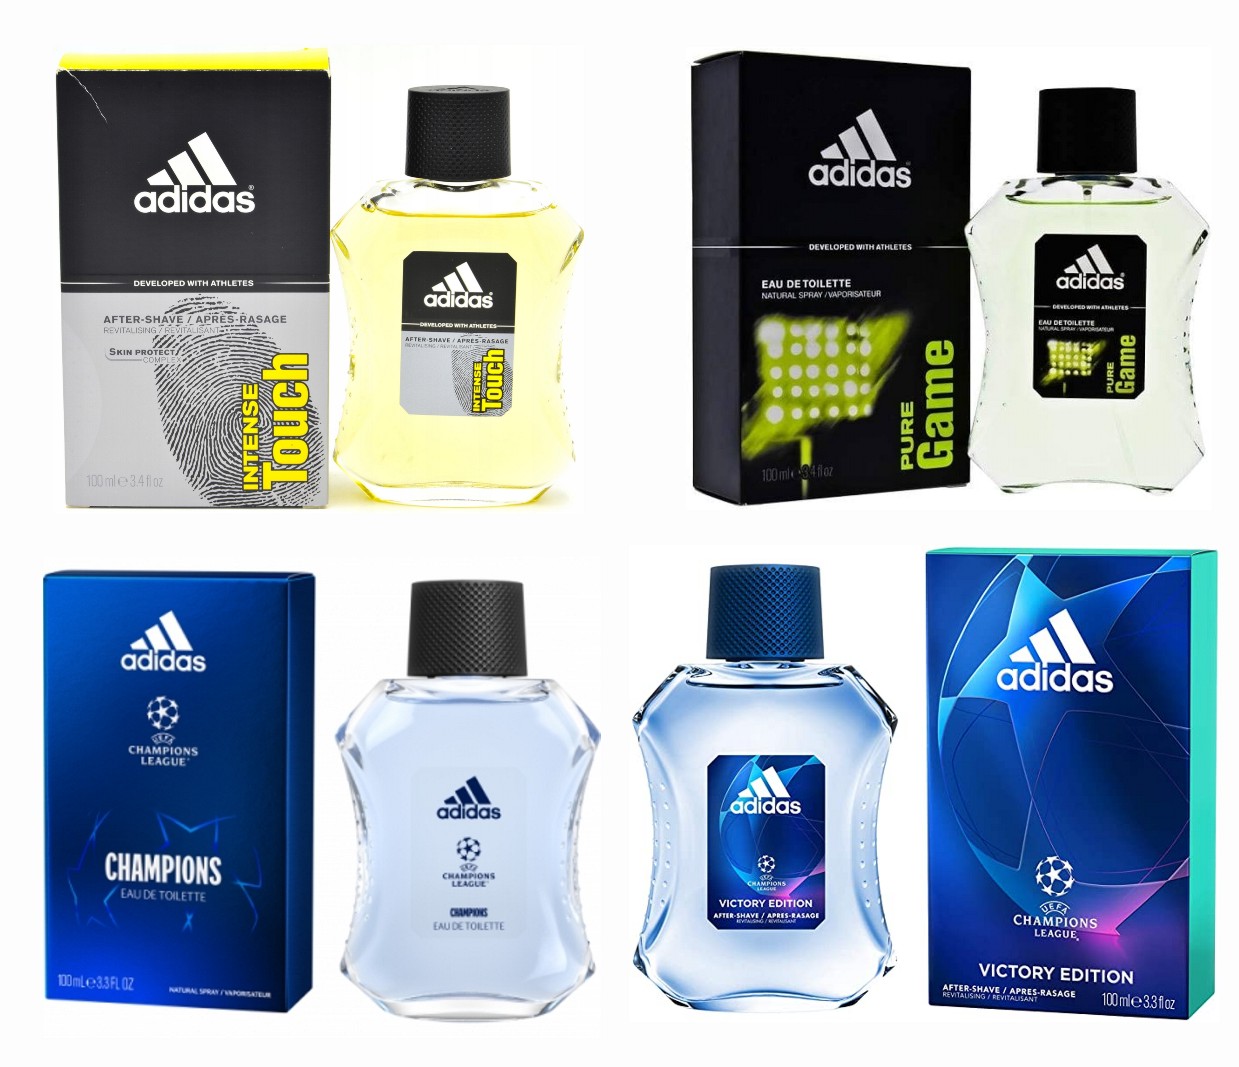 PACK 4x1 ADIDAS: INTENSE TOUCH EDT 100 ML @ + PURE GAME 100 ML @ + UEFA 8 EDT 100 ML @ + VICTORY EDT 100 ML @